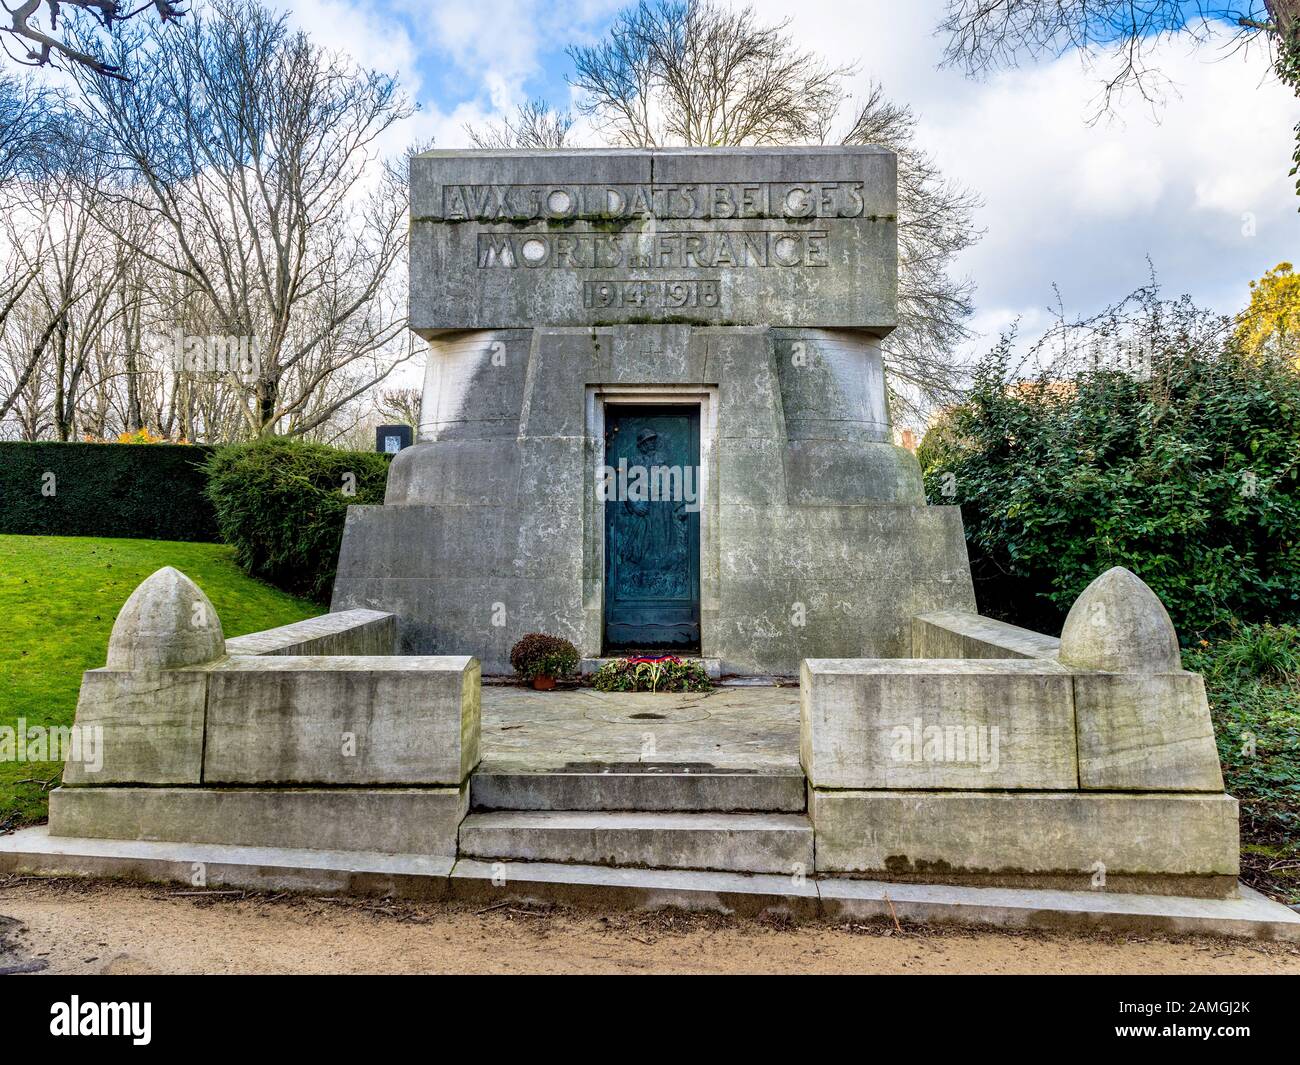 Ornate memorial to fallen soldiers in WWI in the Père Lachaise Cemetery, Paris 75020, France. Stock Photo